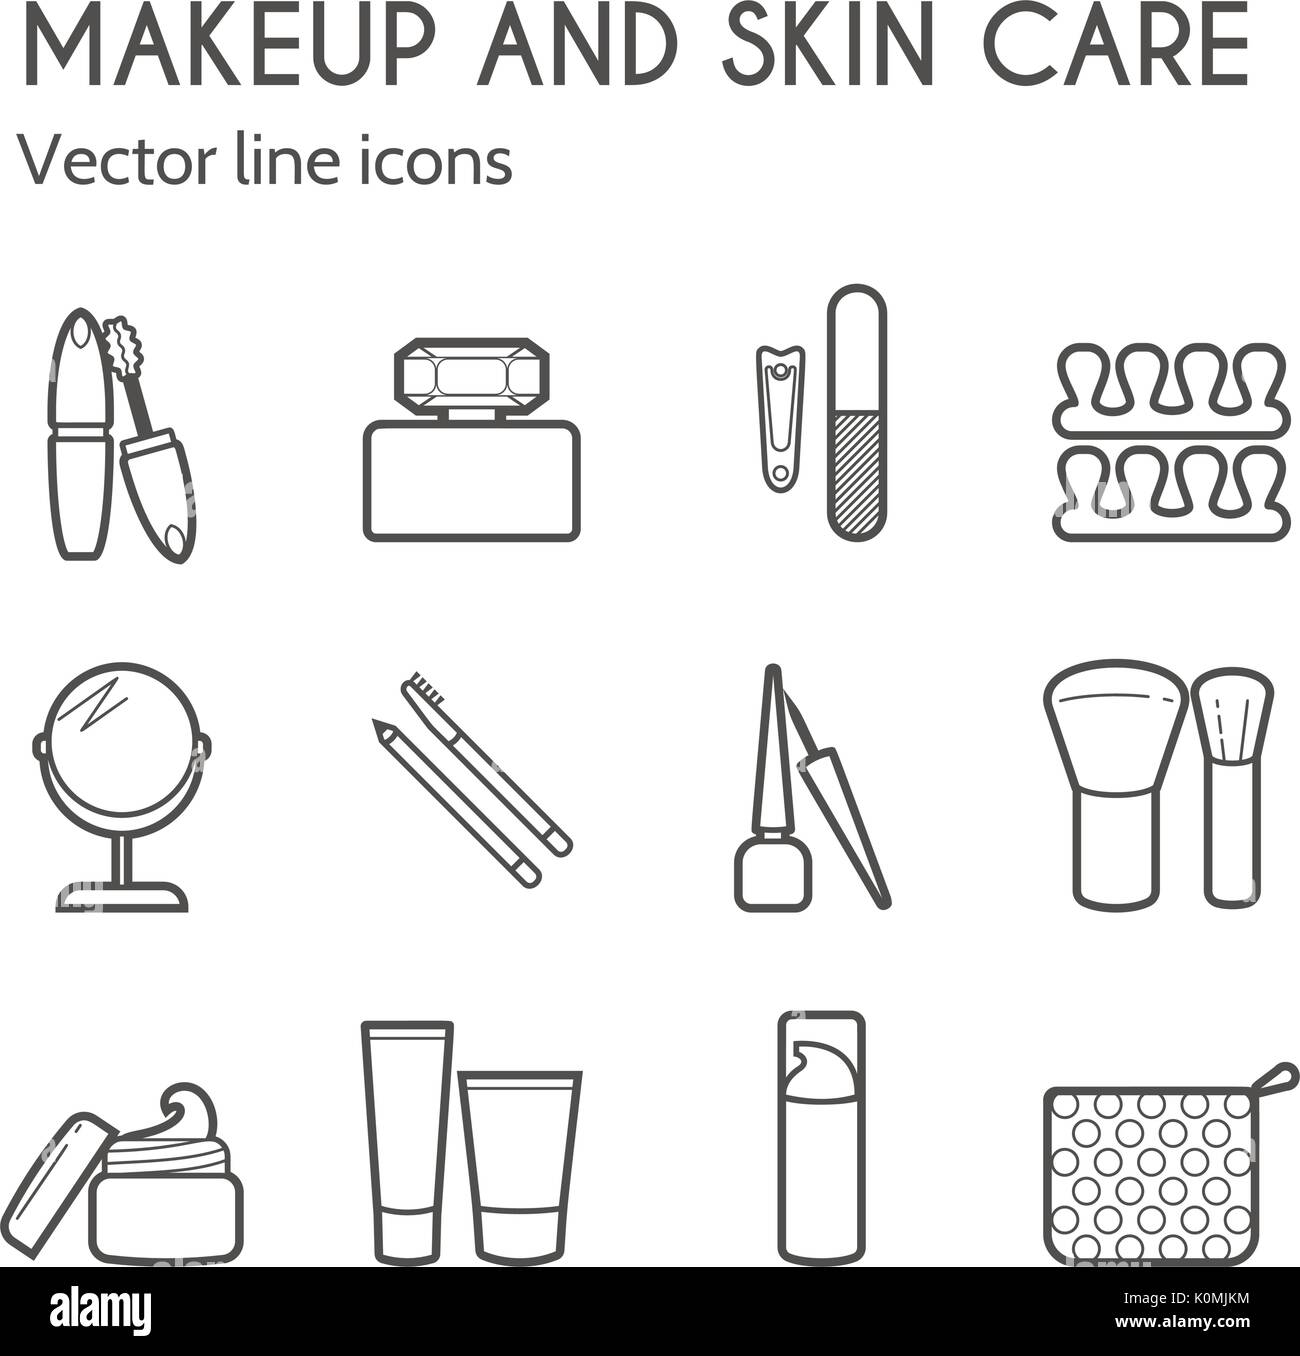 Vector cosmetic icons. Mascara, brush, perfume, cream and other make-up items. Makeup thin linear signs for manicure, pedicure and Visage. Stock Vector